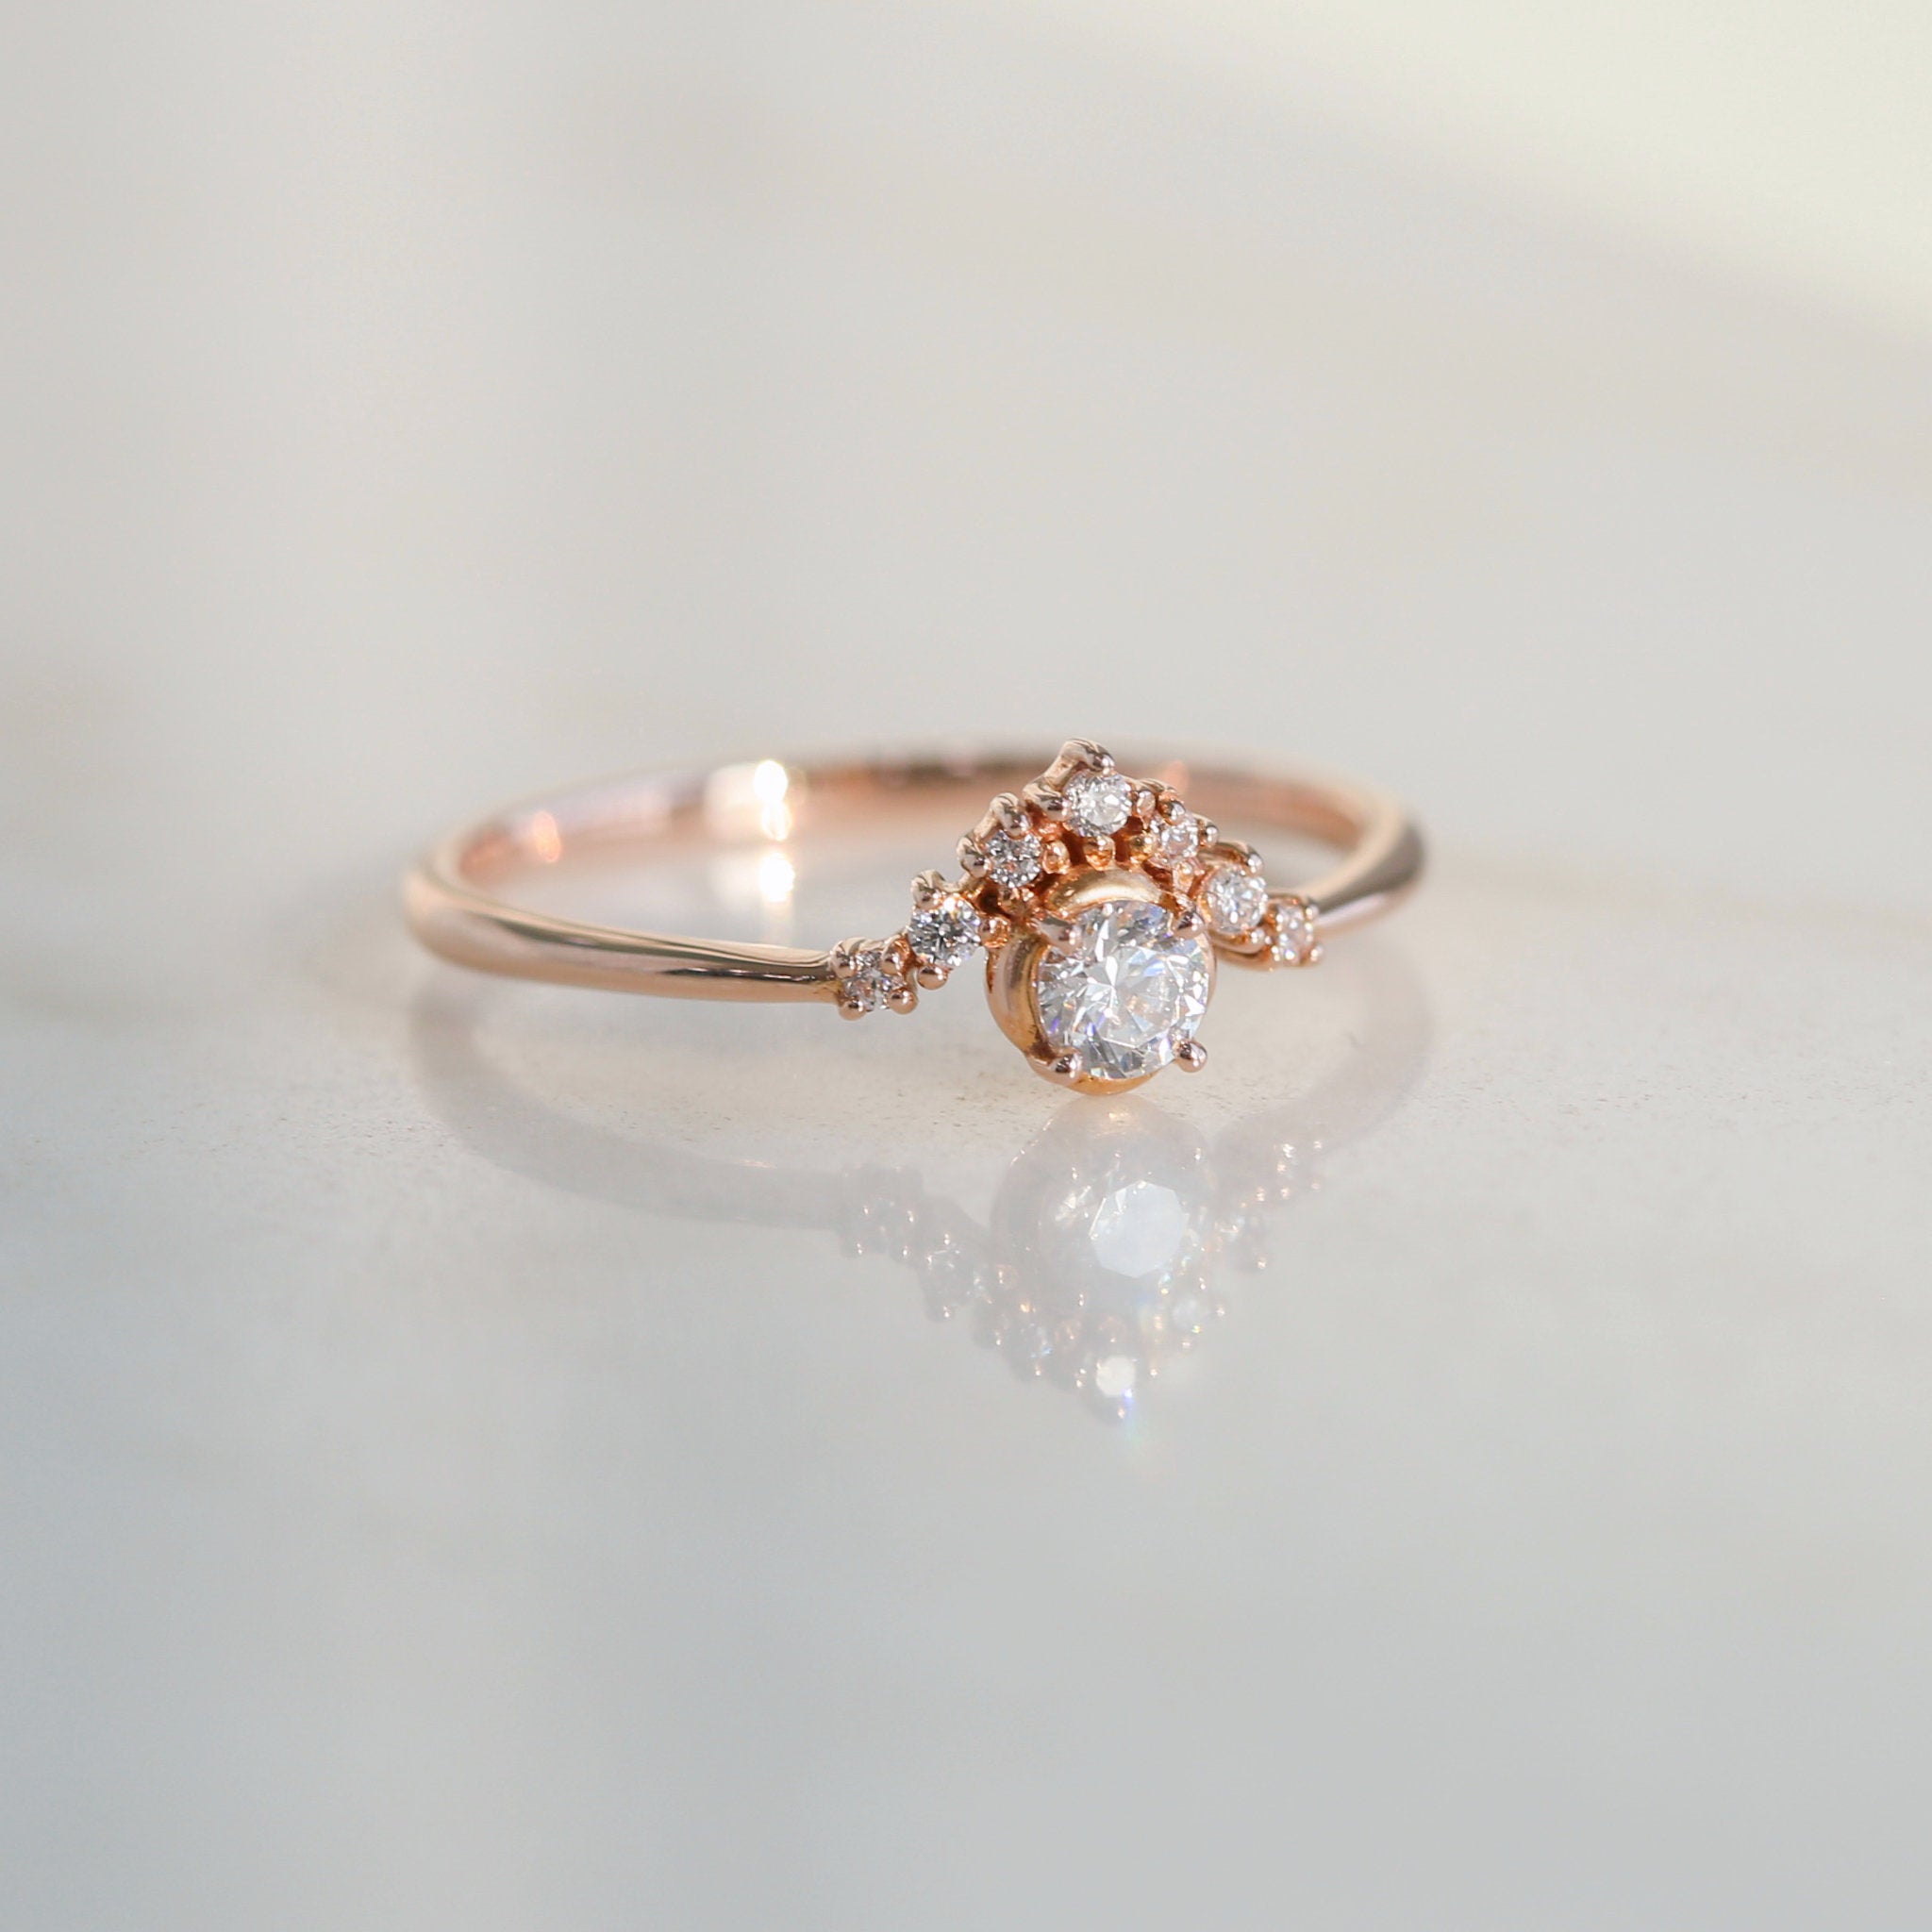 My Queen ring – TED&MAG JEWELRY STUDIO